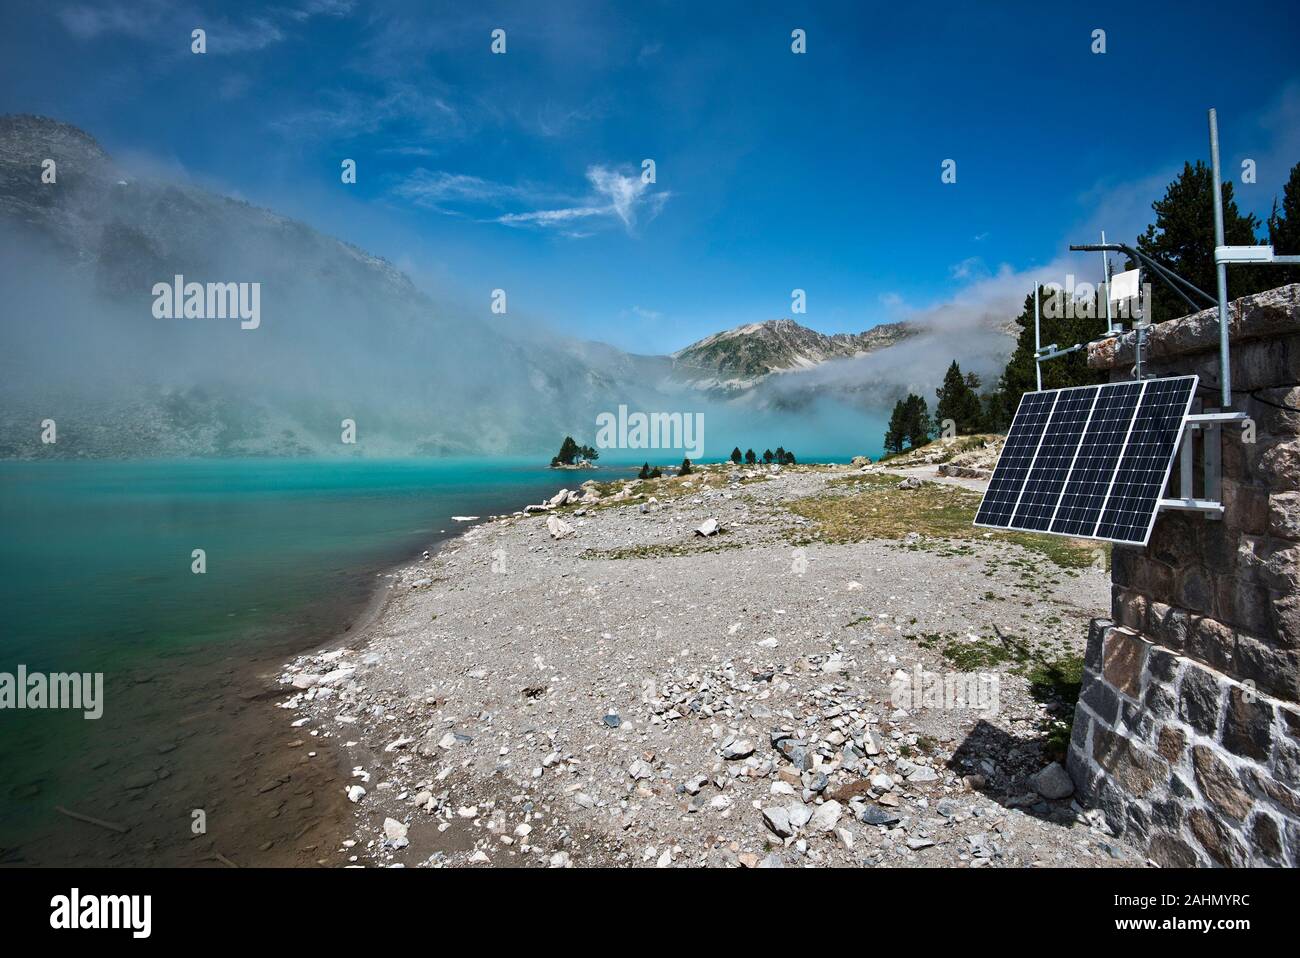 The border of Aubert lake in Neouvielle Natural reserve, the service cabin at right equipped with the solar cell panel, the lake and mountain slopes h Stock Photo